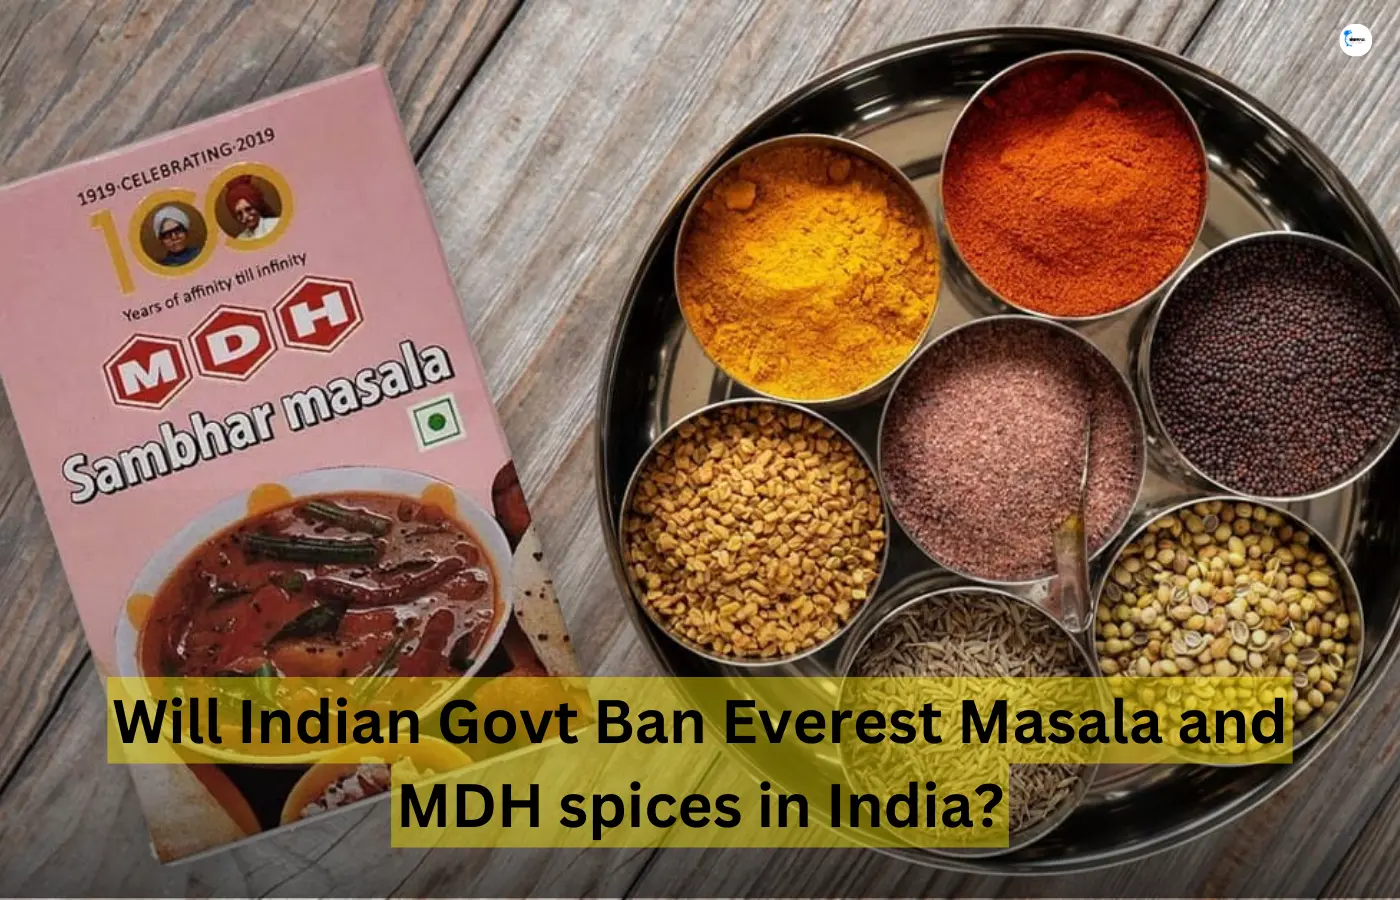 Will Indian Govt Ban Everest Masala and MDH spices in India?